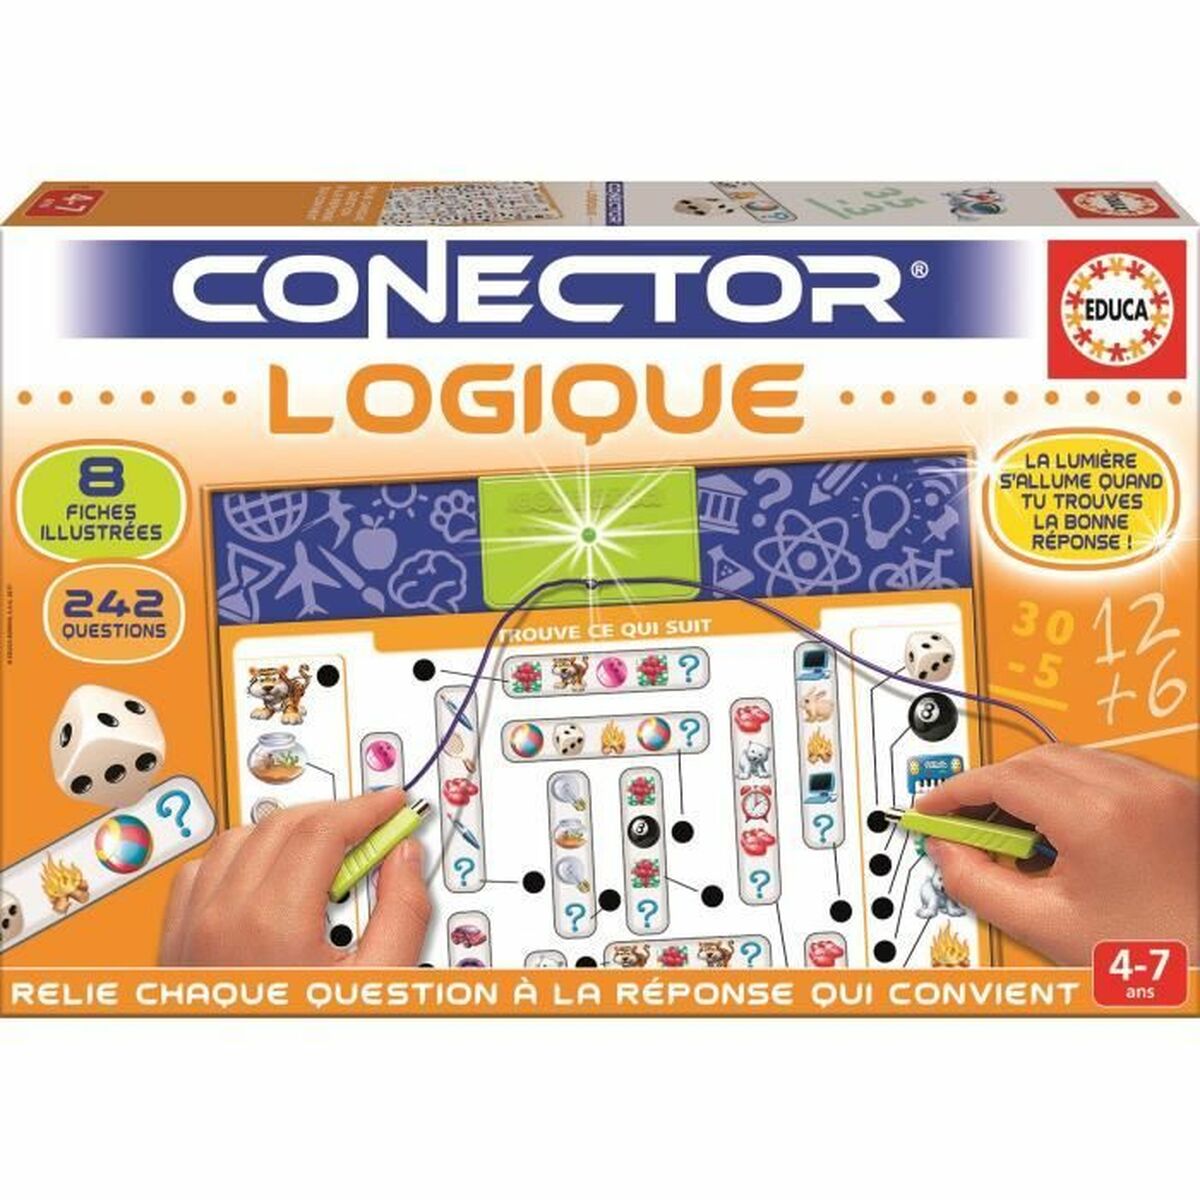 Educational game Educa Connector logic game (FR) - Little Baby Shop